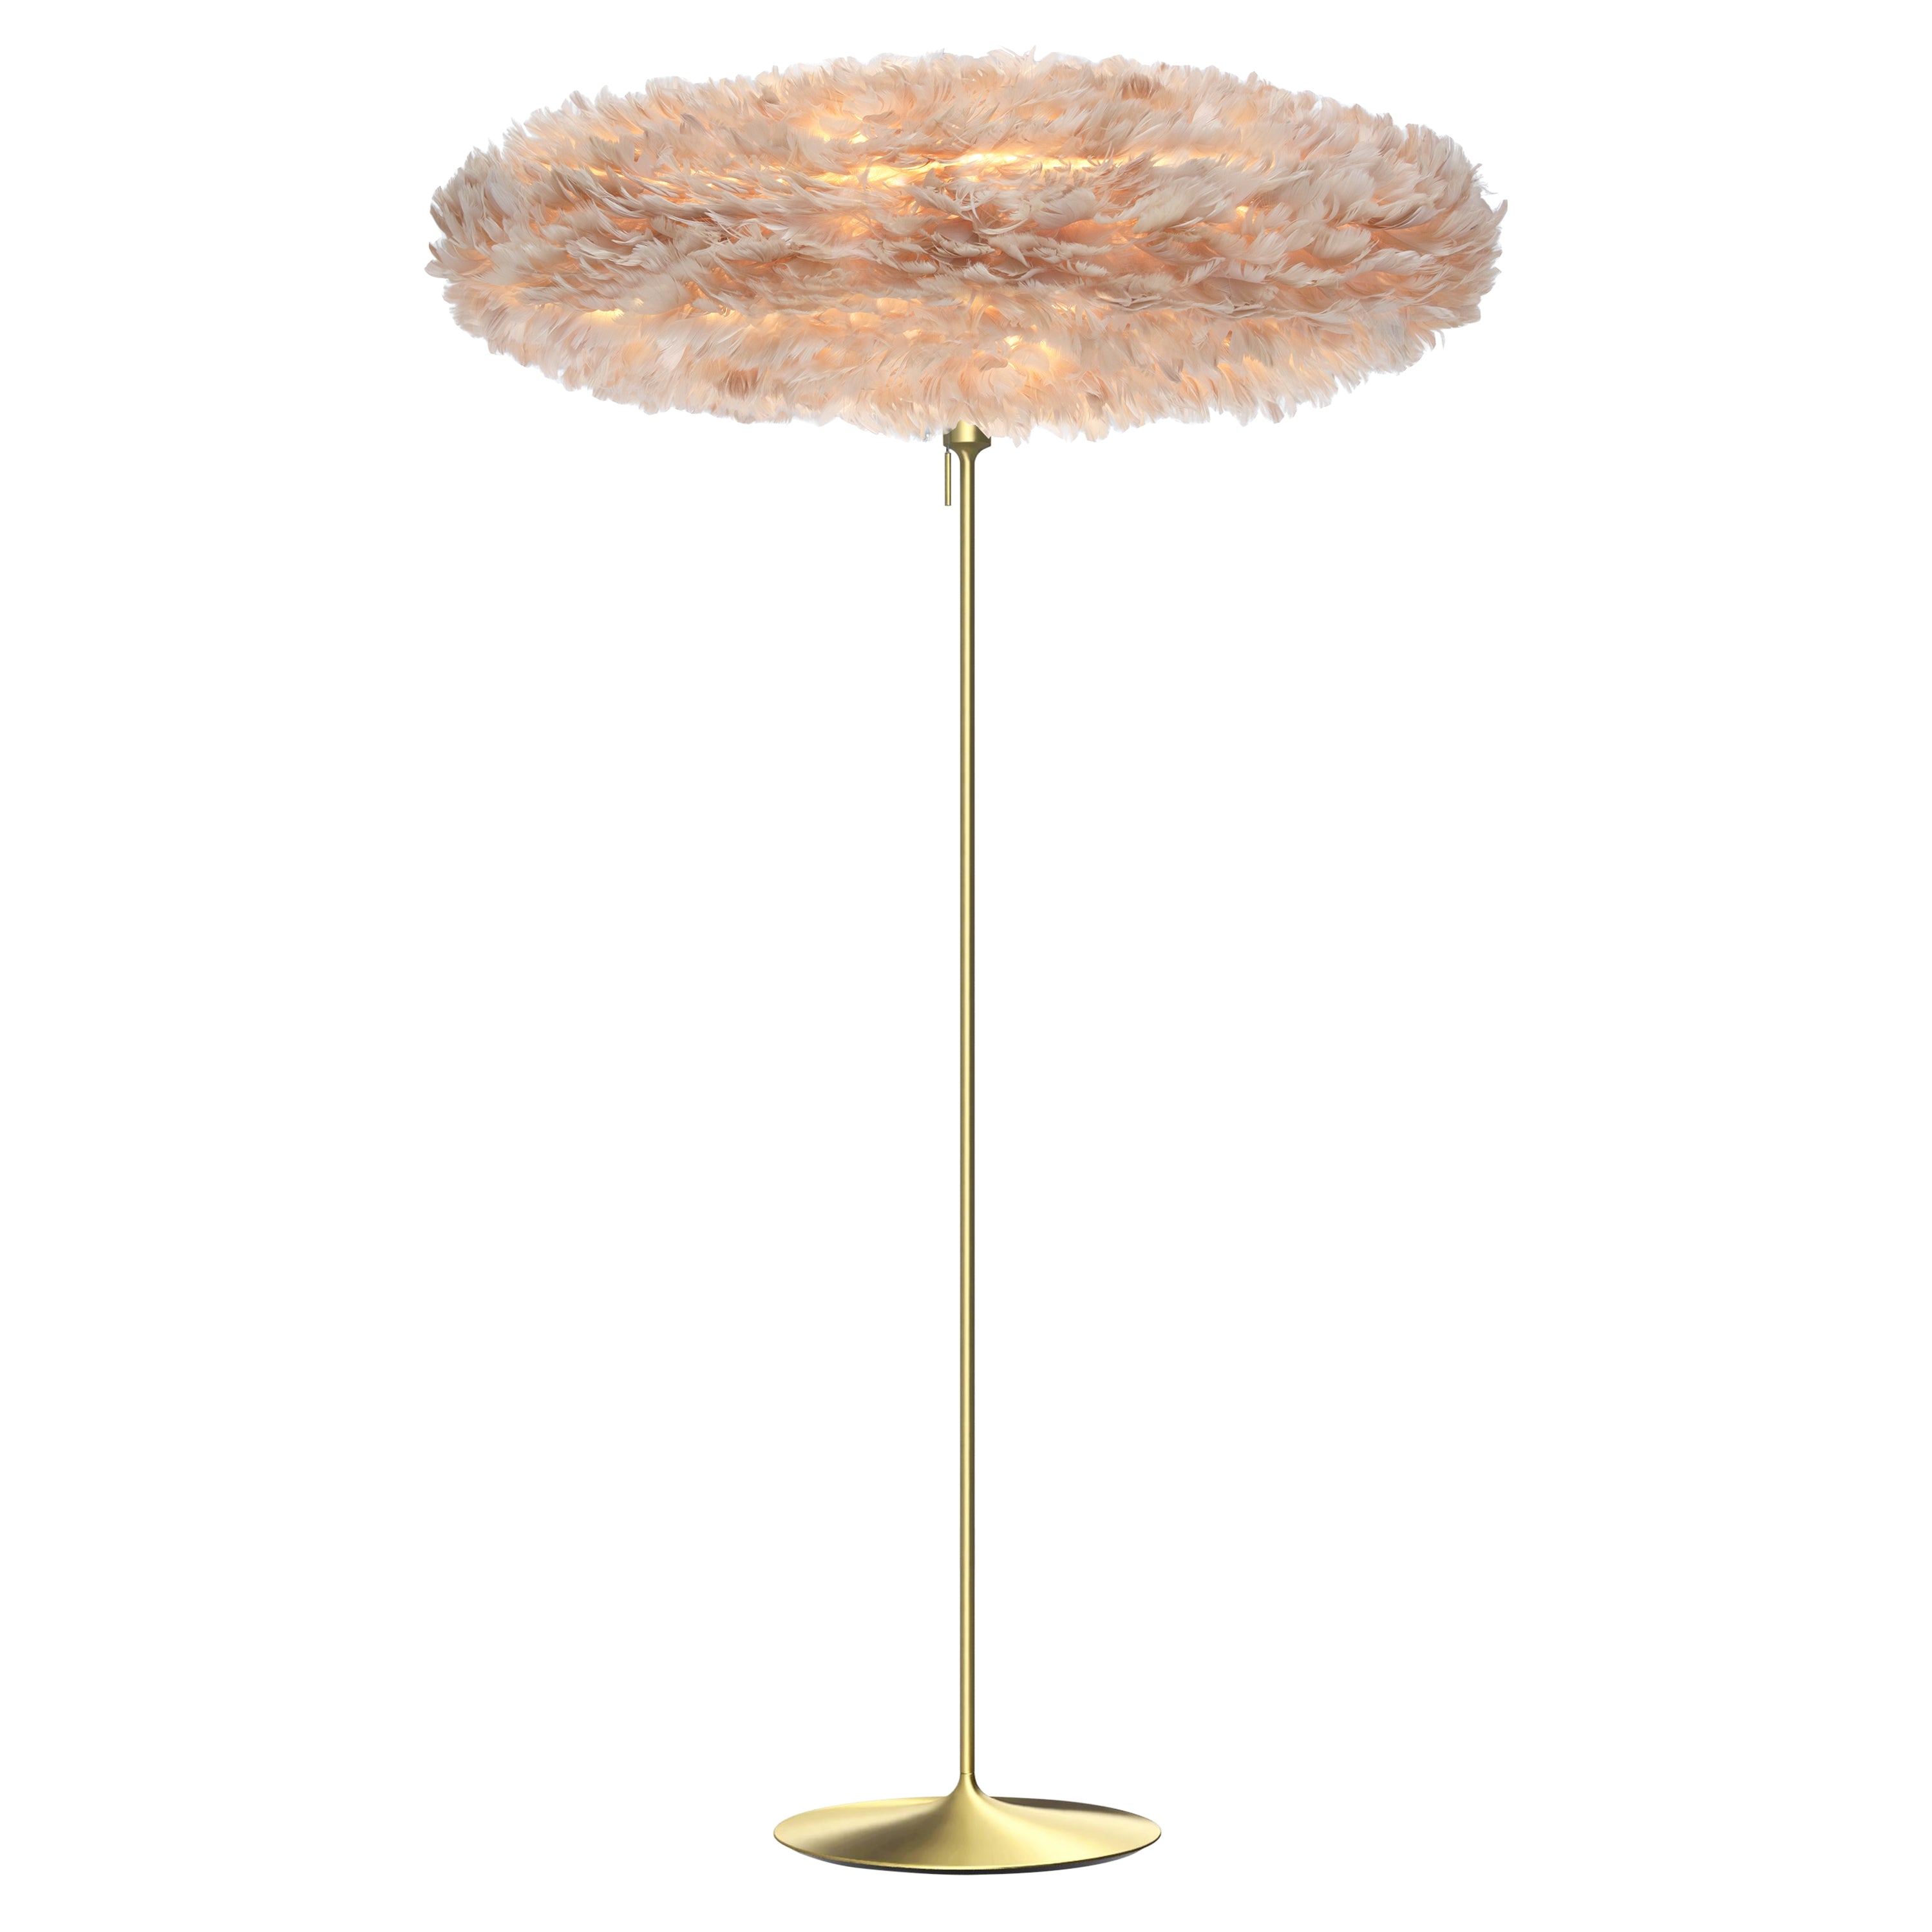 Eos Esther Champagne Floor Lamp: Large - 29.5